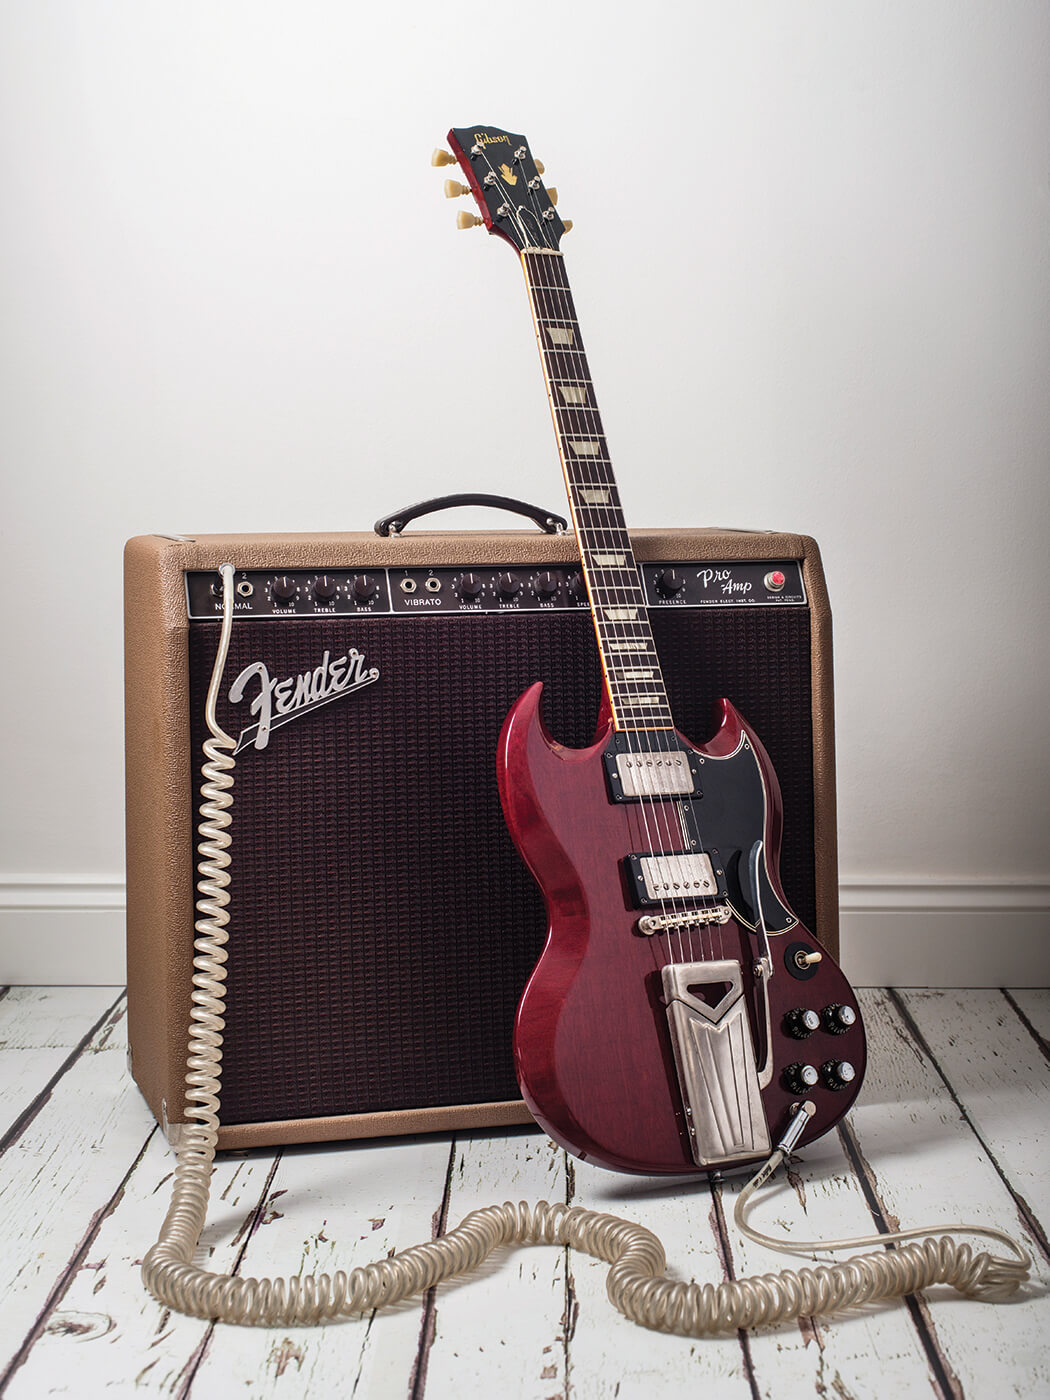 The oral history of the Gibson SG 